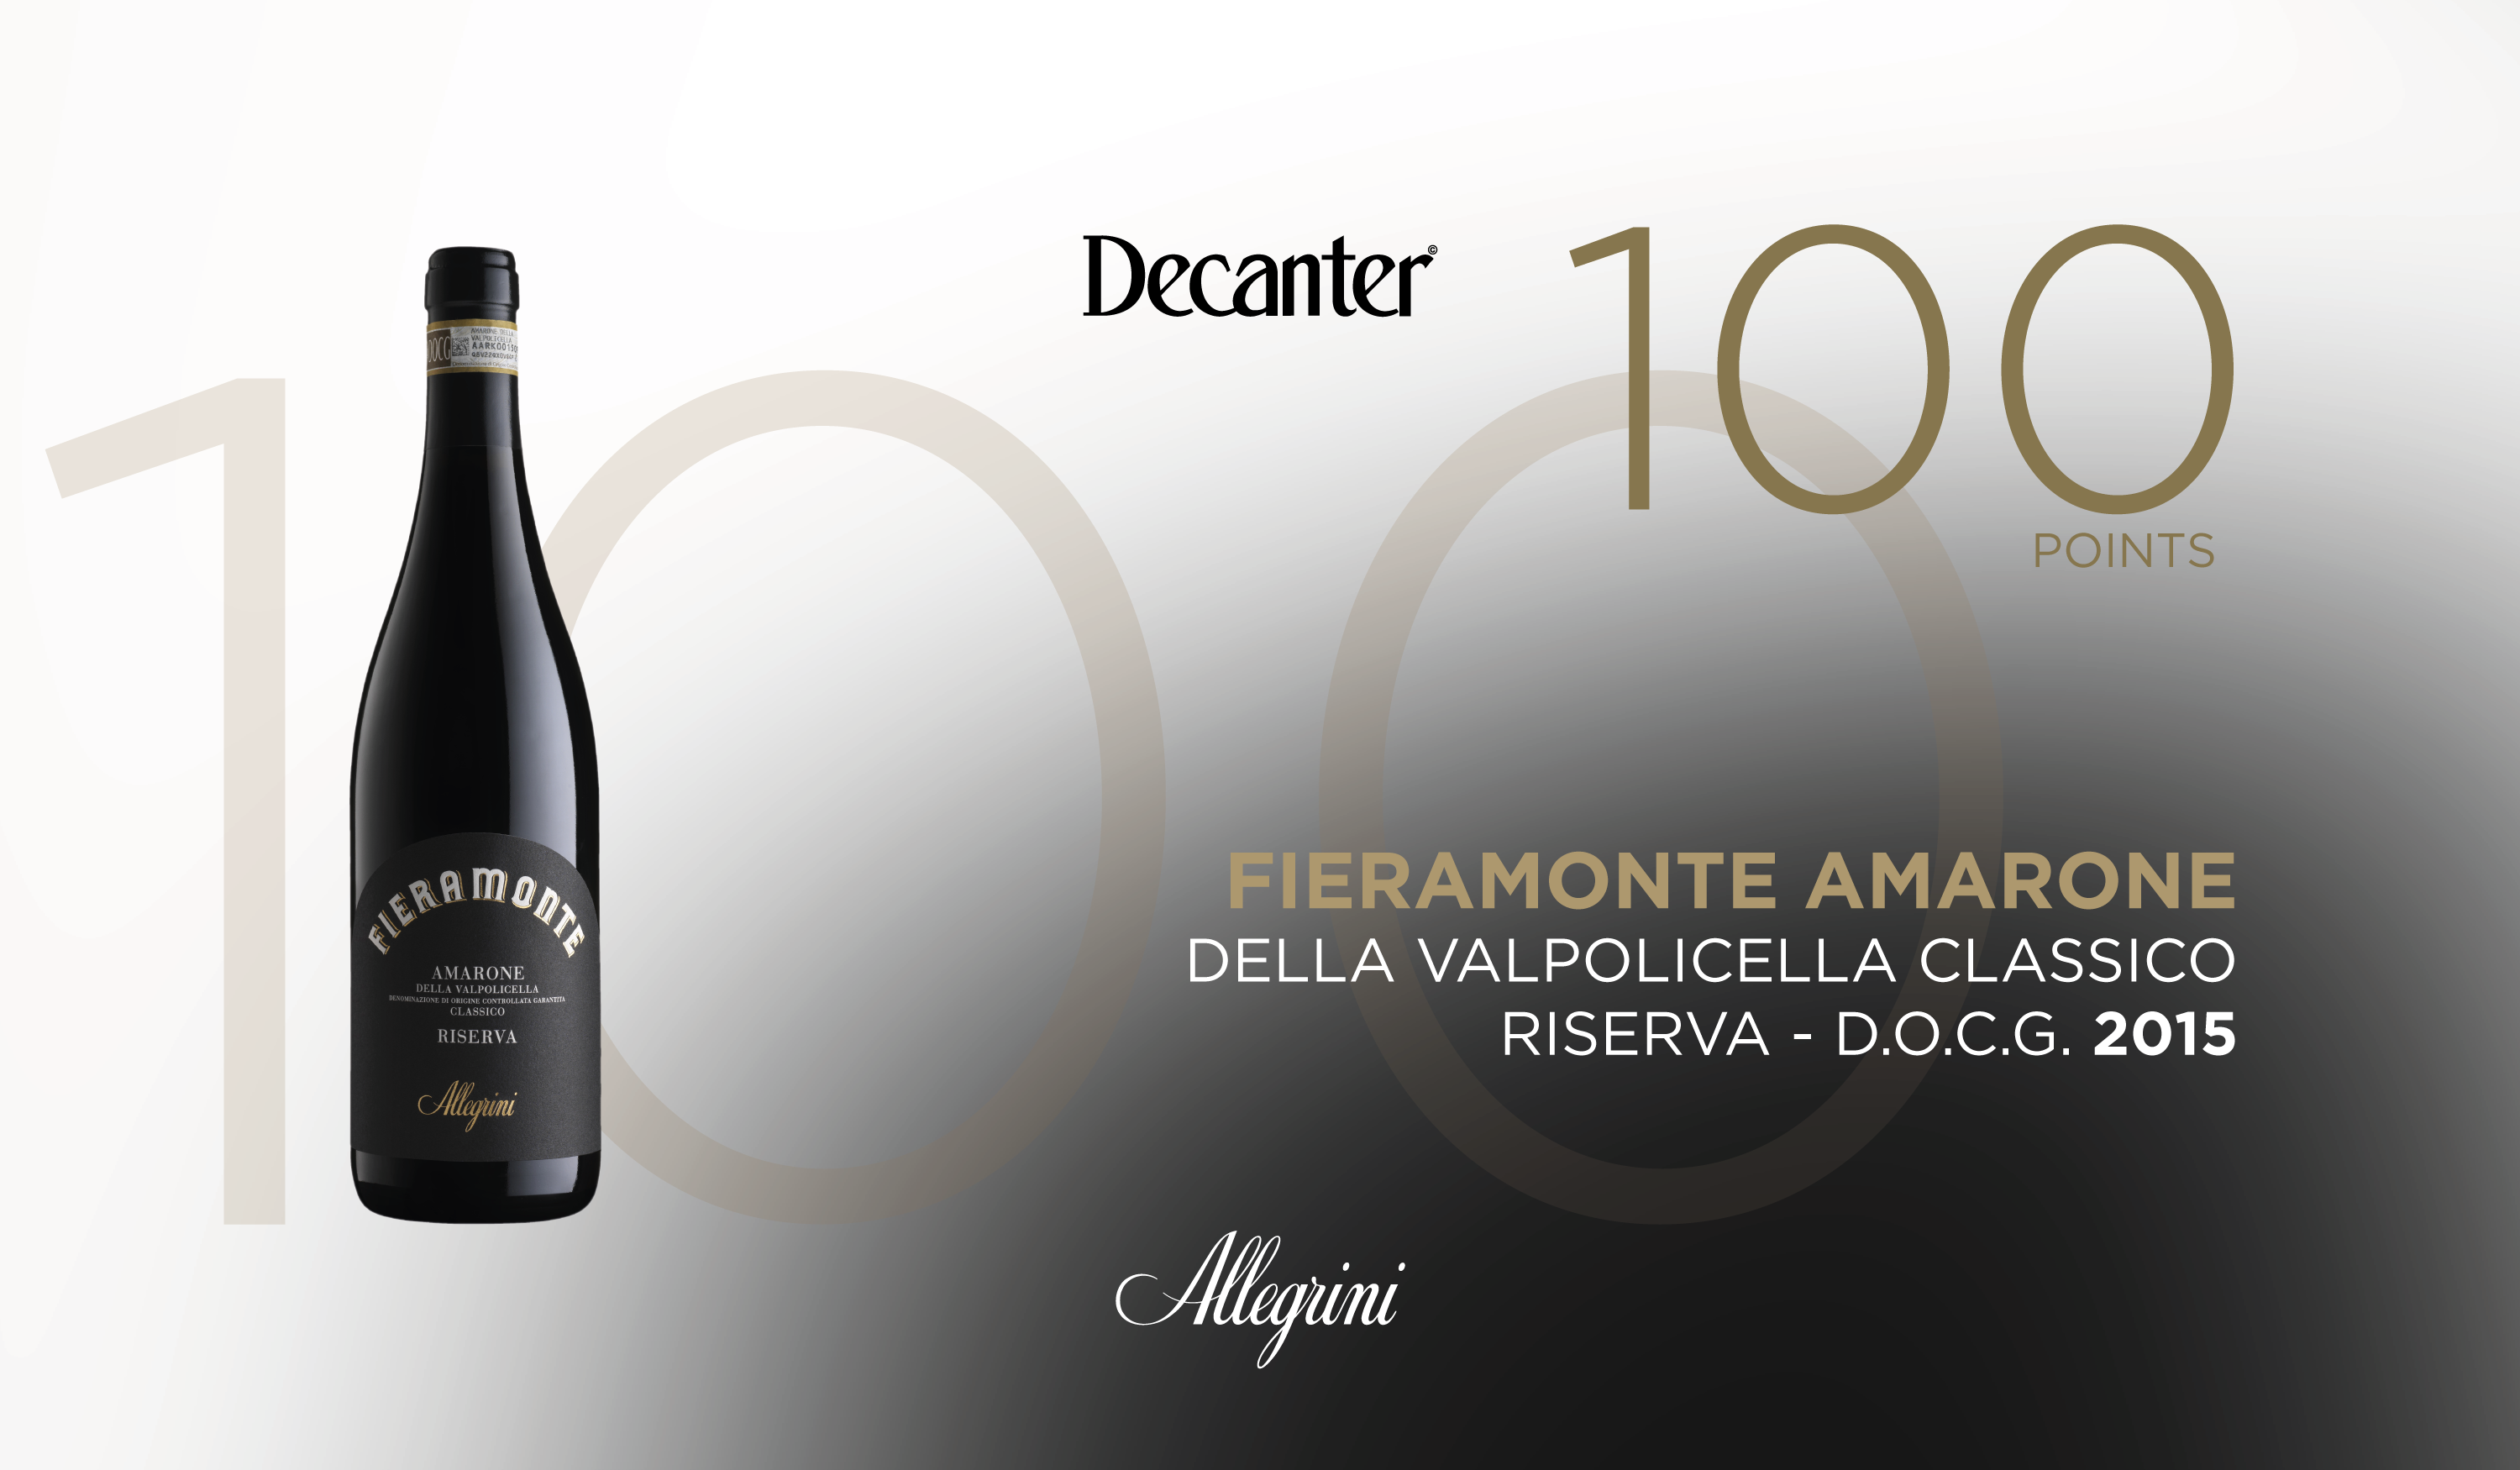 100 points by Decanter for Amarone Fieramonte